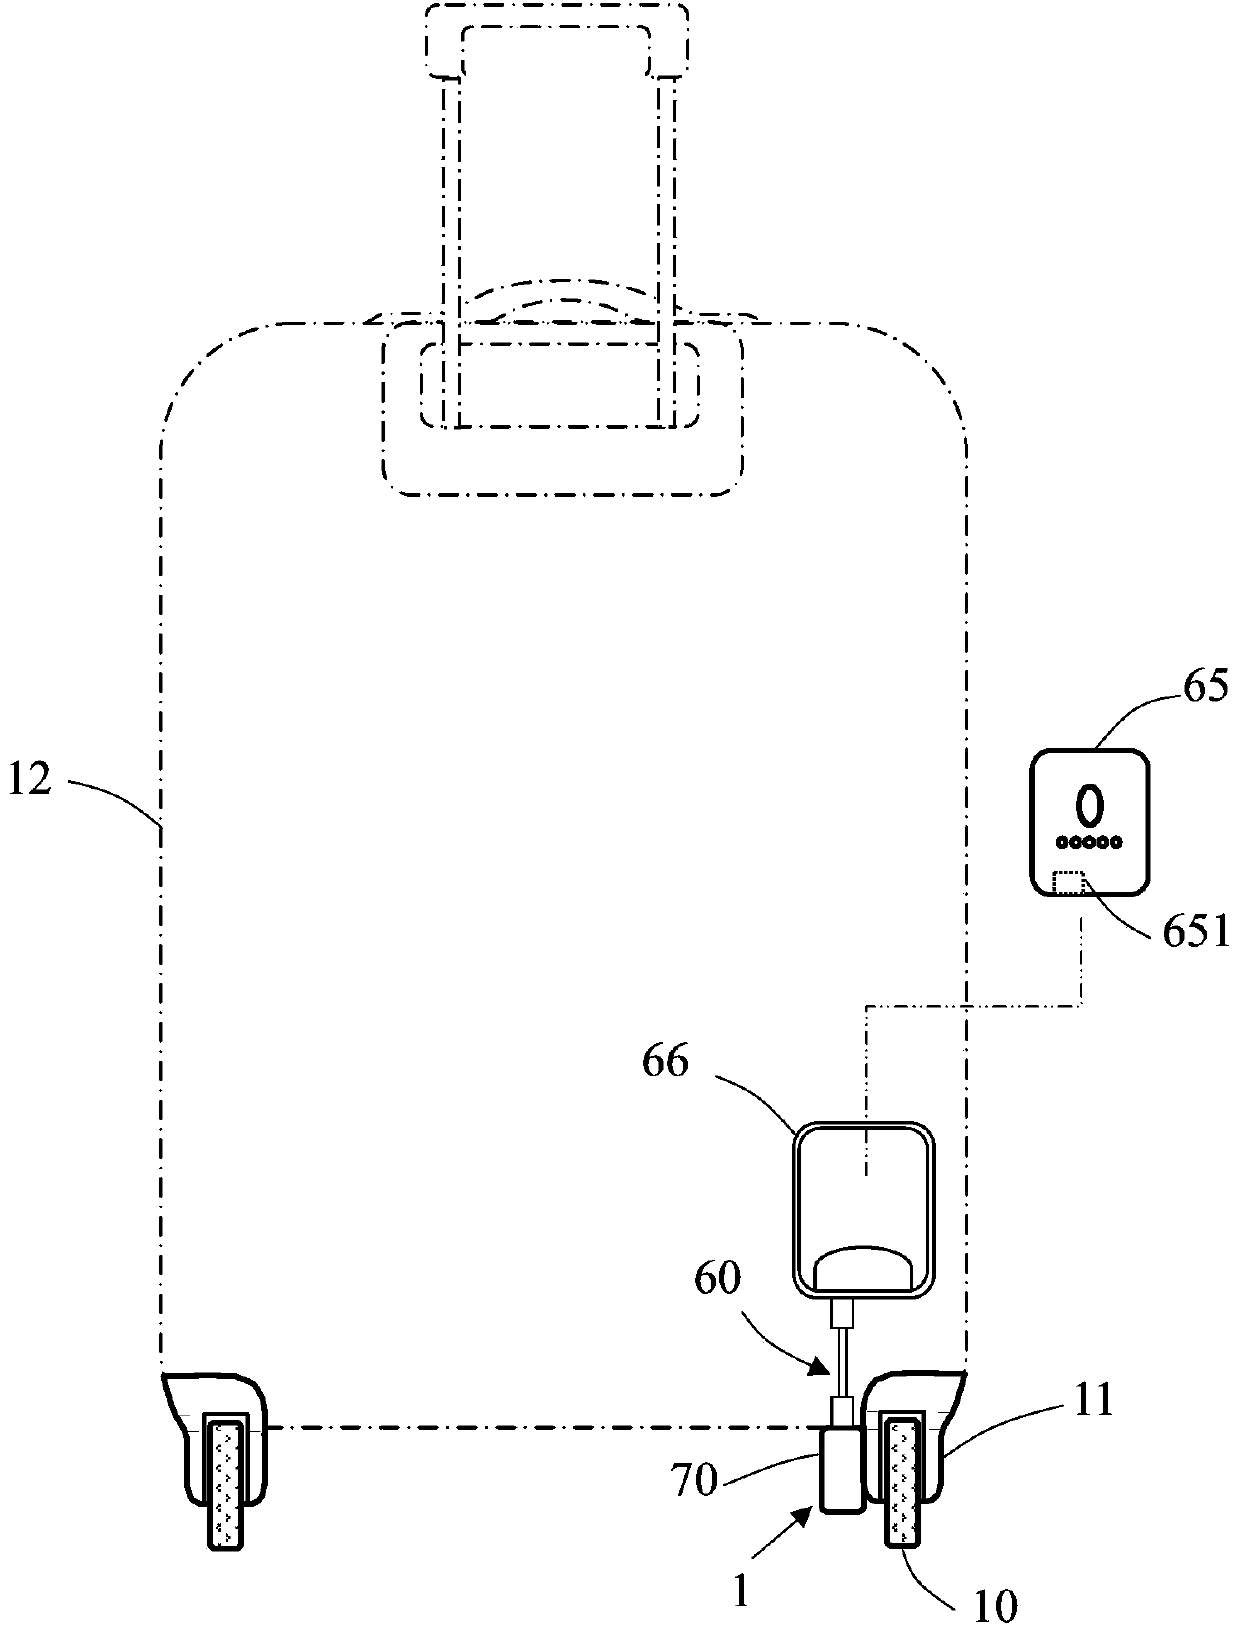 Roller charging device for luggage case